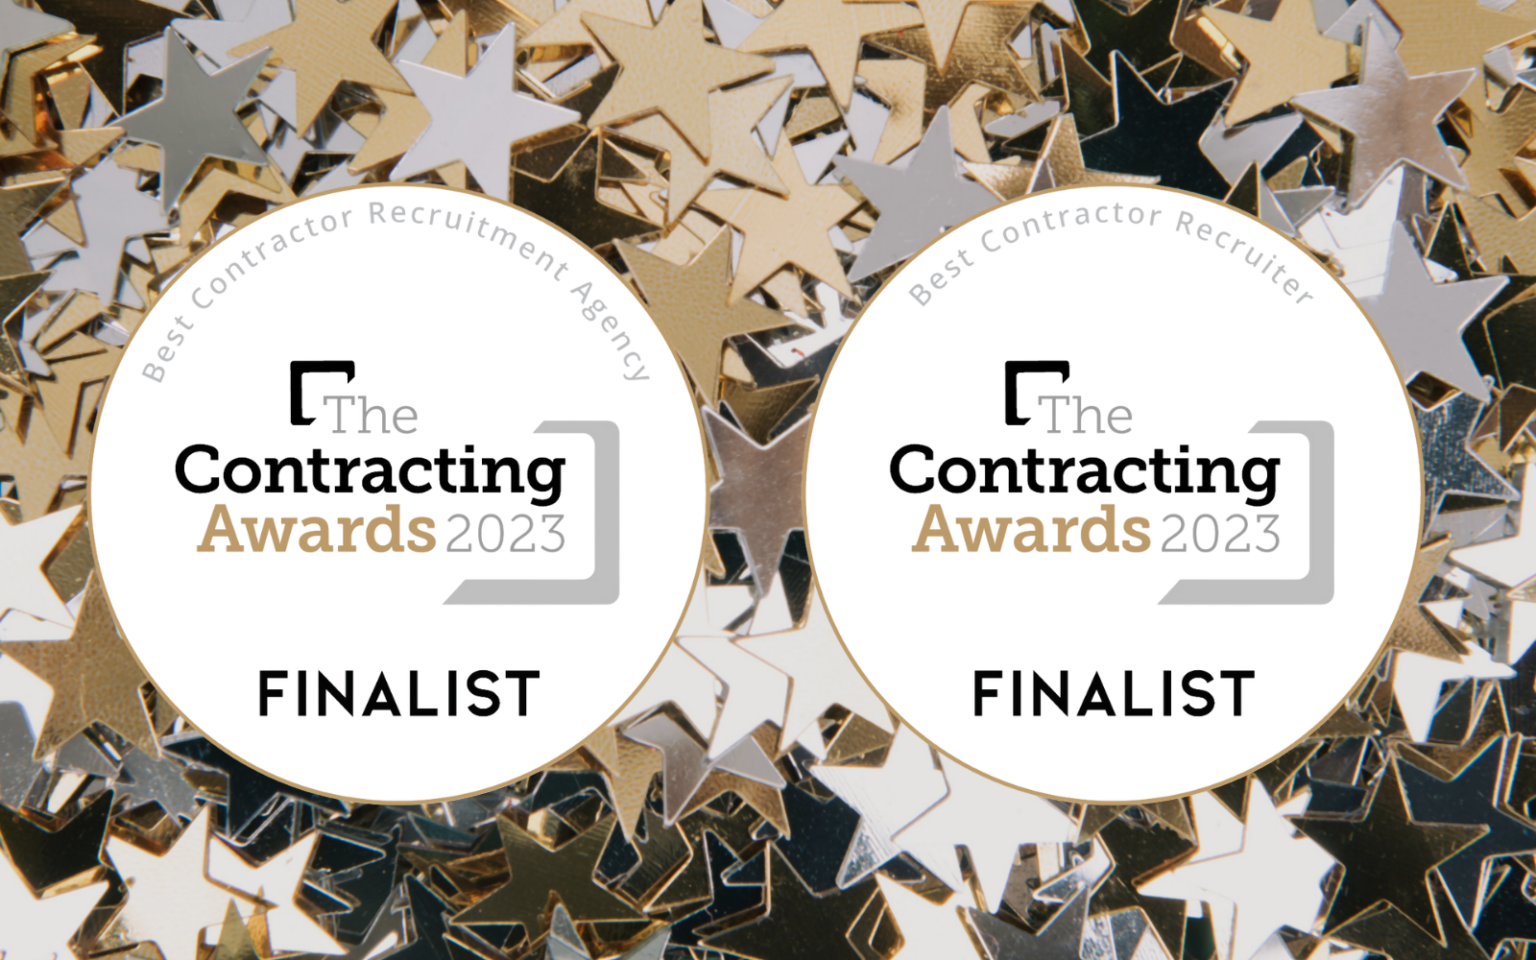 Our Contracting Awards